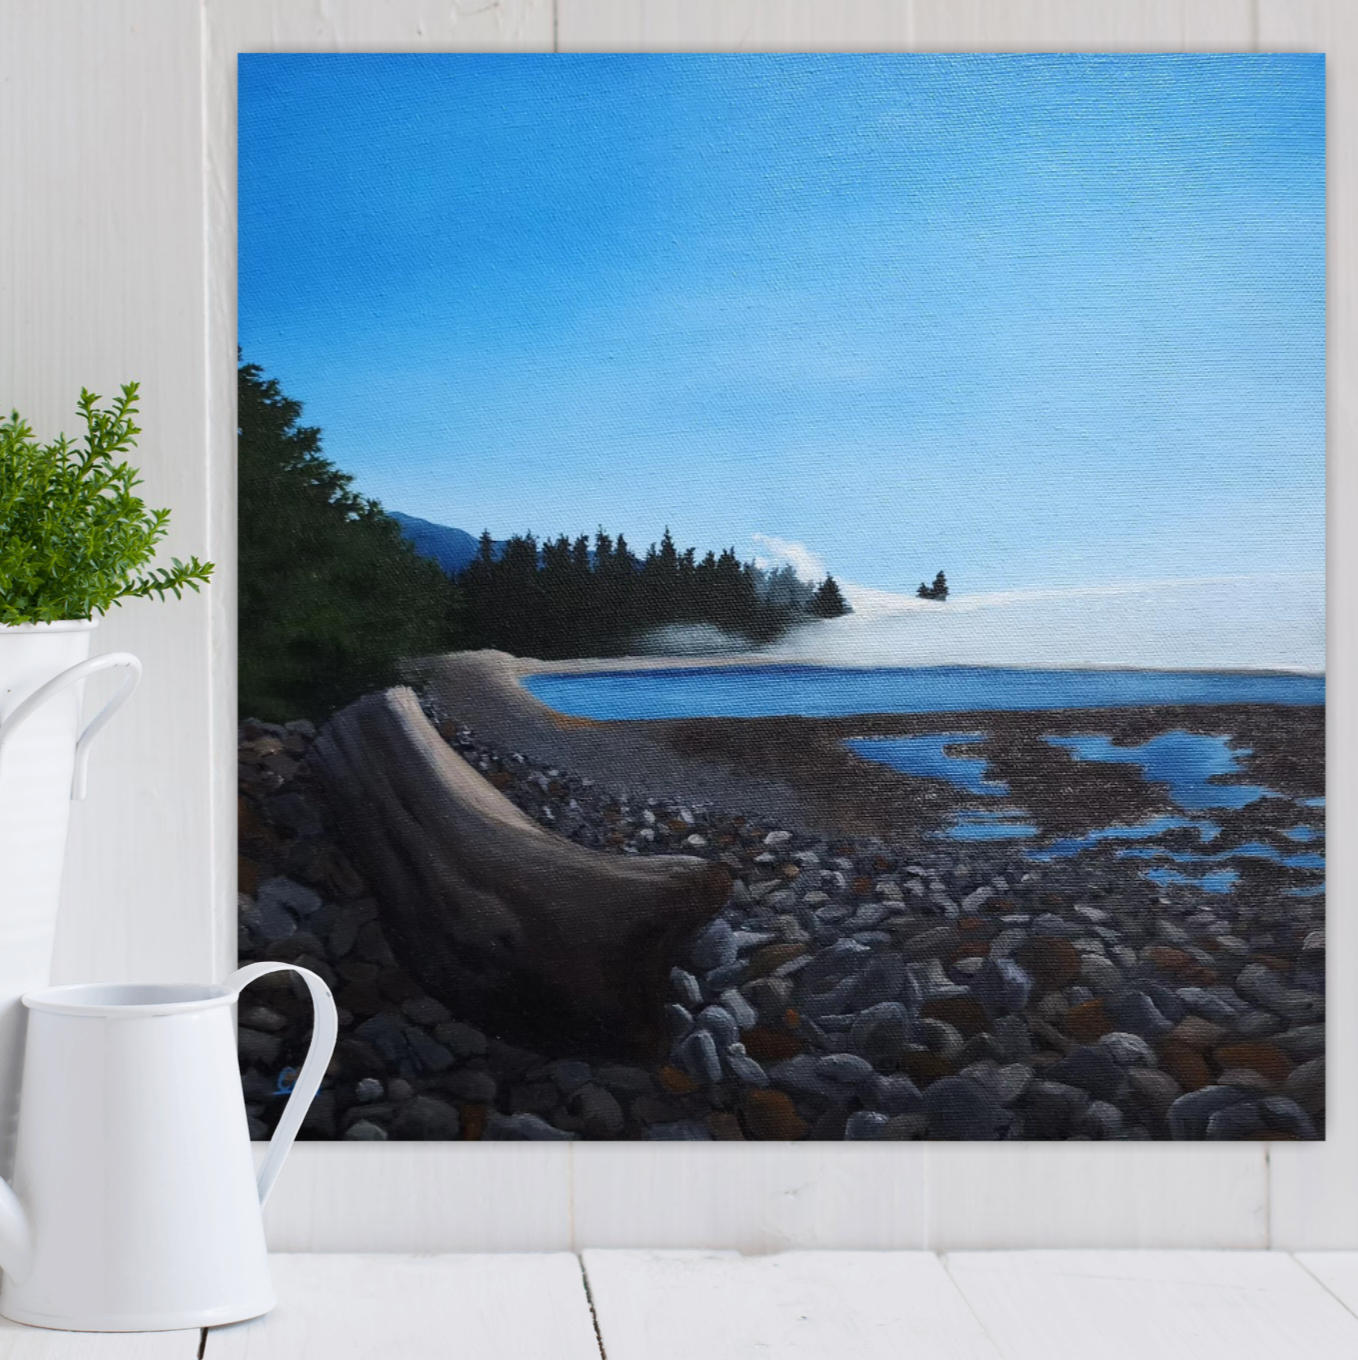 Christina Gouldsborough's original landscape painting "Misty Driftwood Daydream" of a Vancouver rocky shore with a large piece of driftwood, on a white wall, with a plant and water can in front on a table